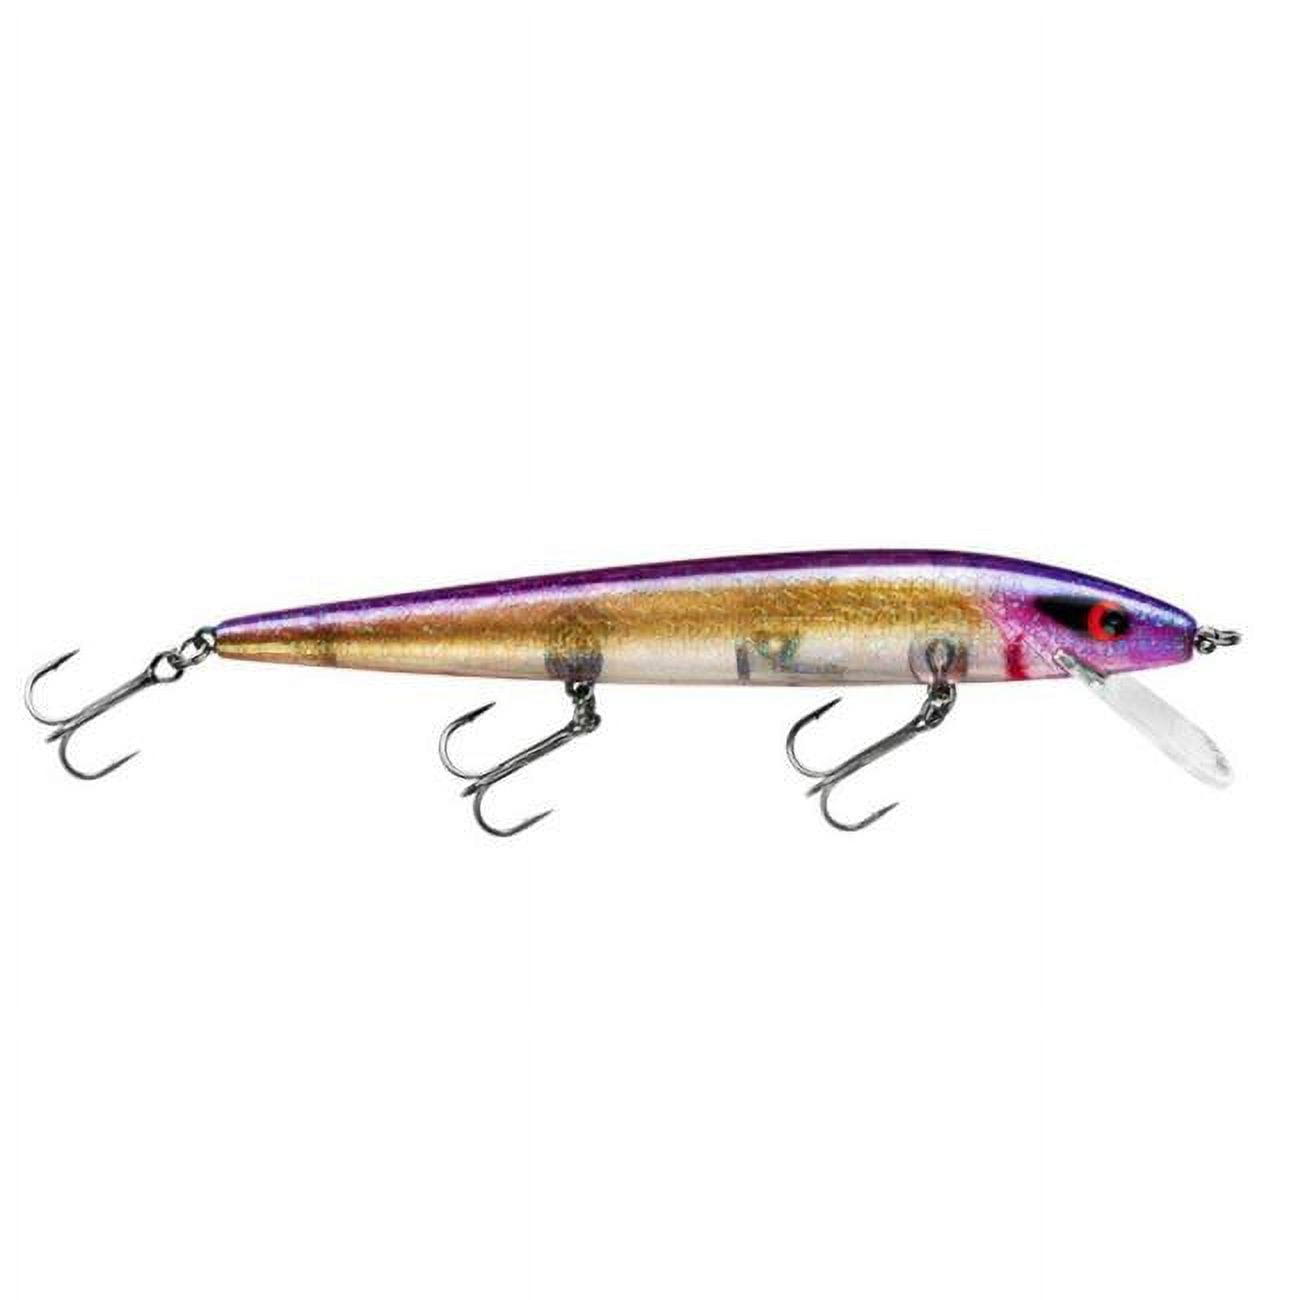 Smithwick Perfect 10 Rogue Fishing Lure Hard bait Table Rock Gold